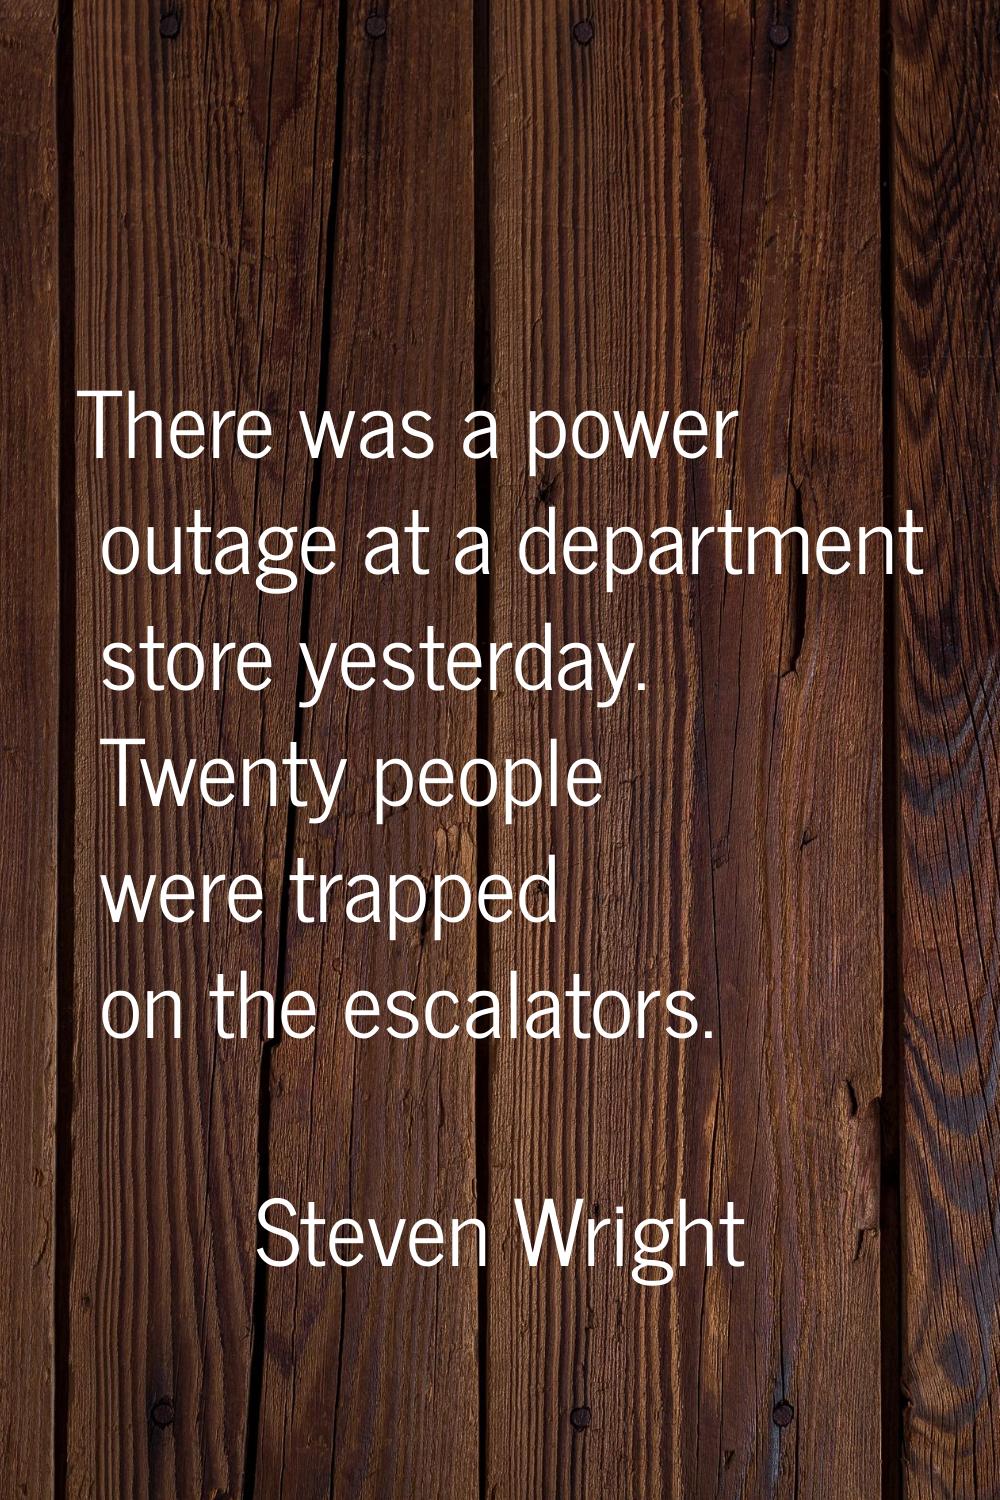 There was a power outage at a department store yesterday. Twenty people were trapped on the escalat